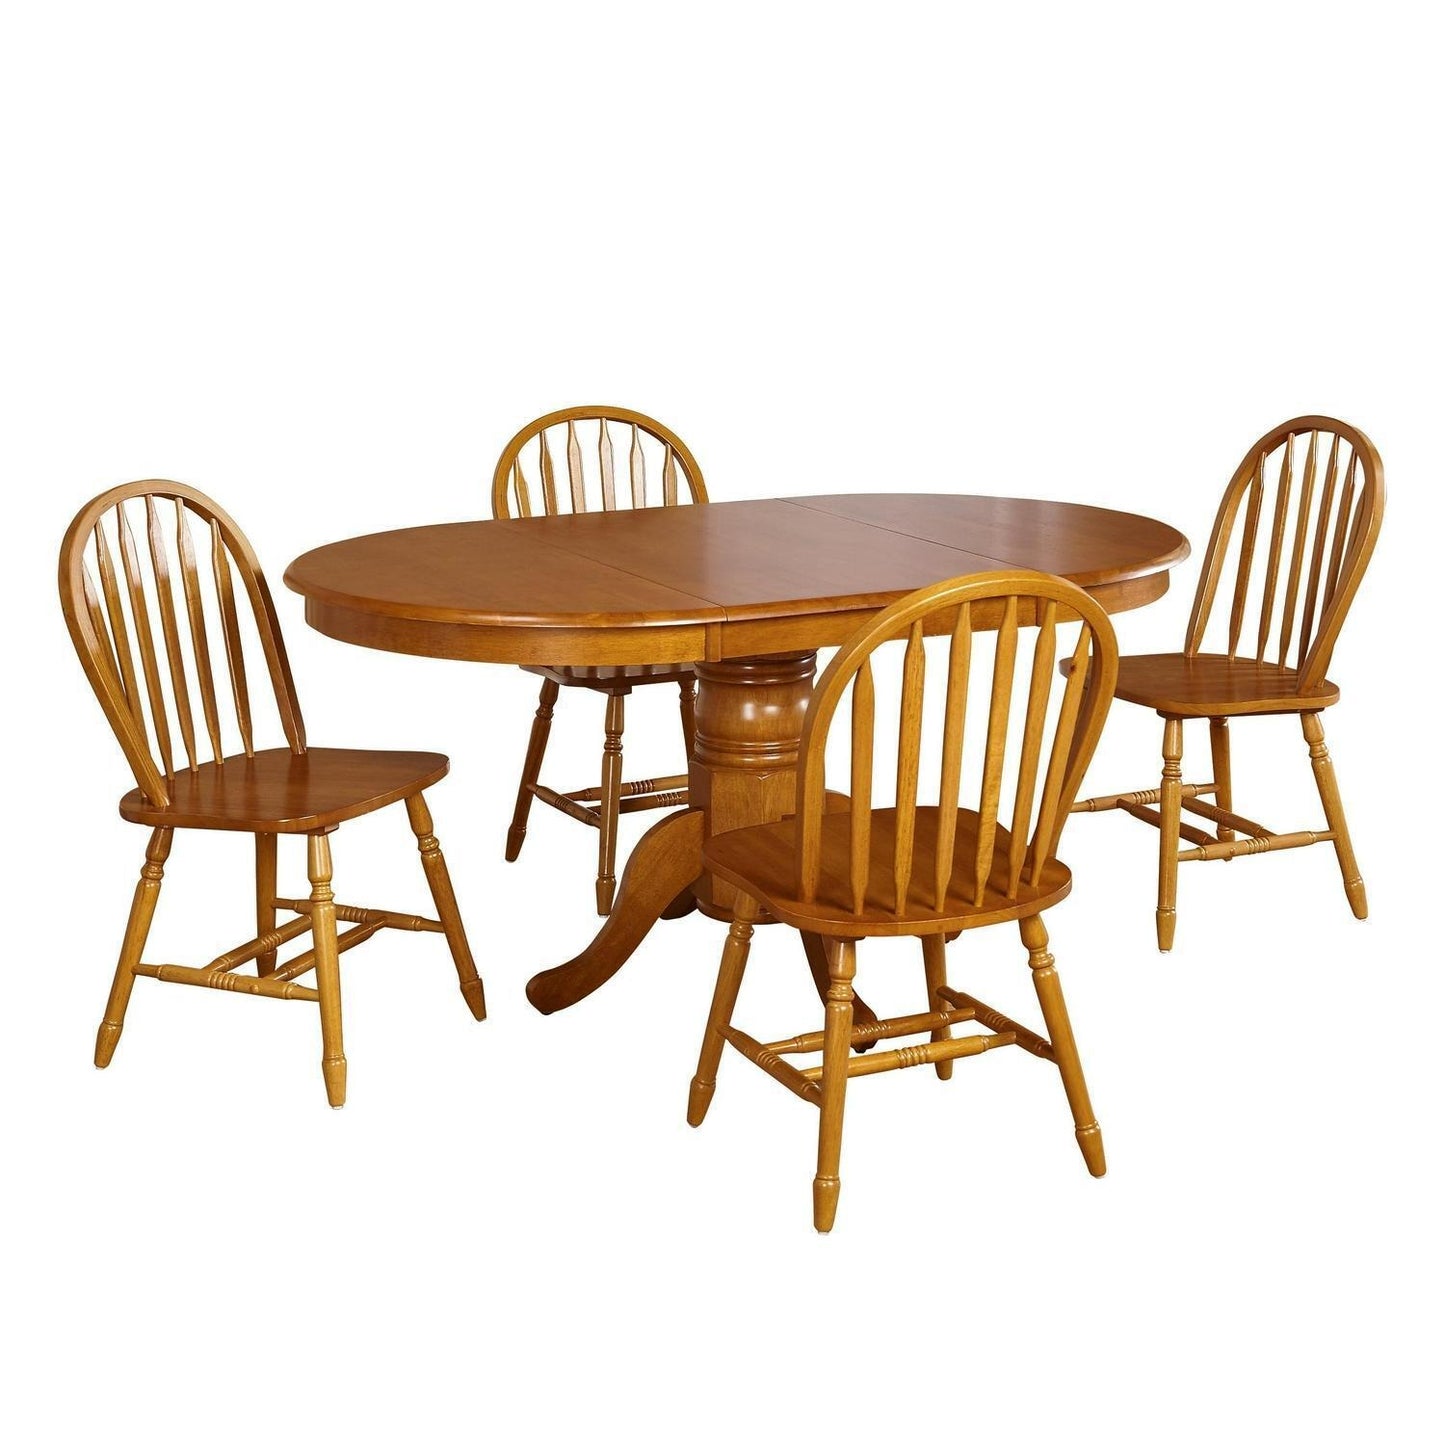 5-Pc Country Style Dining Set: Solid Wood w/ 22in Leaf - Nat Oak Finish